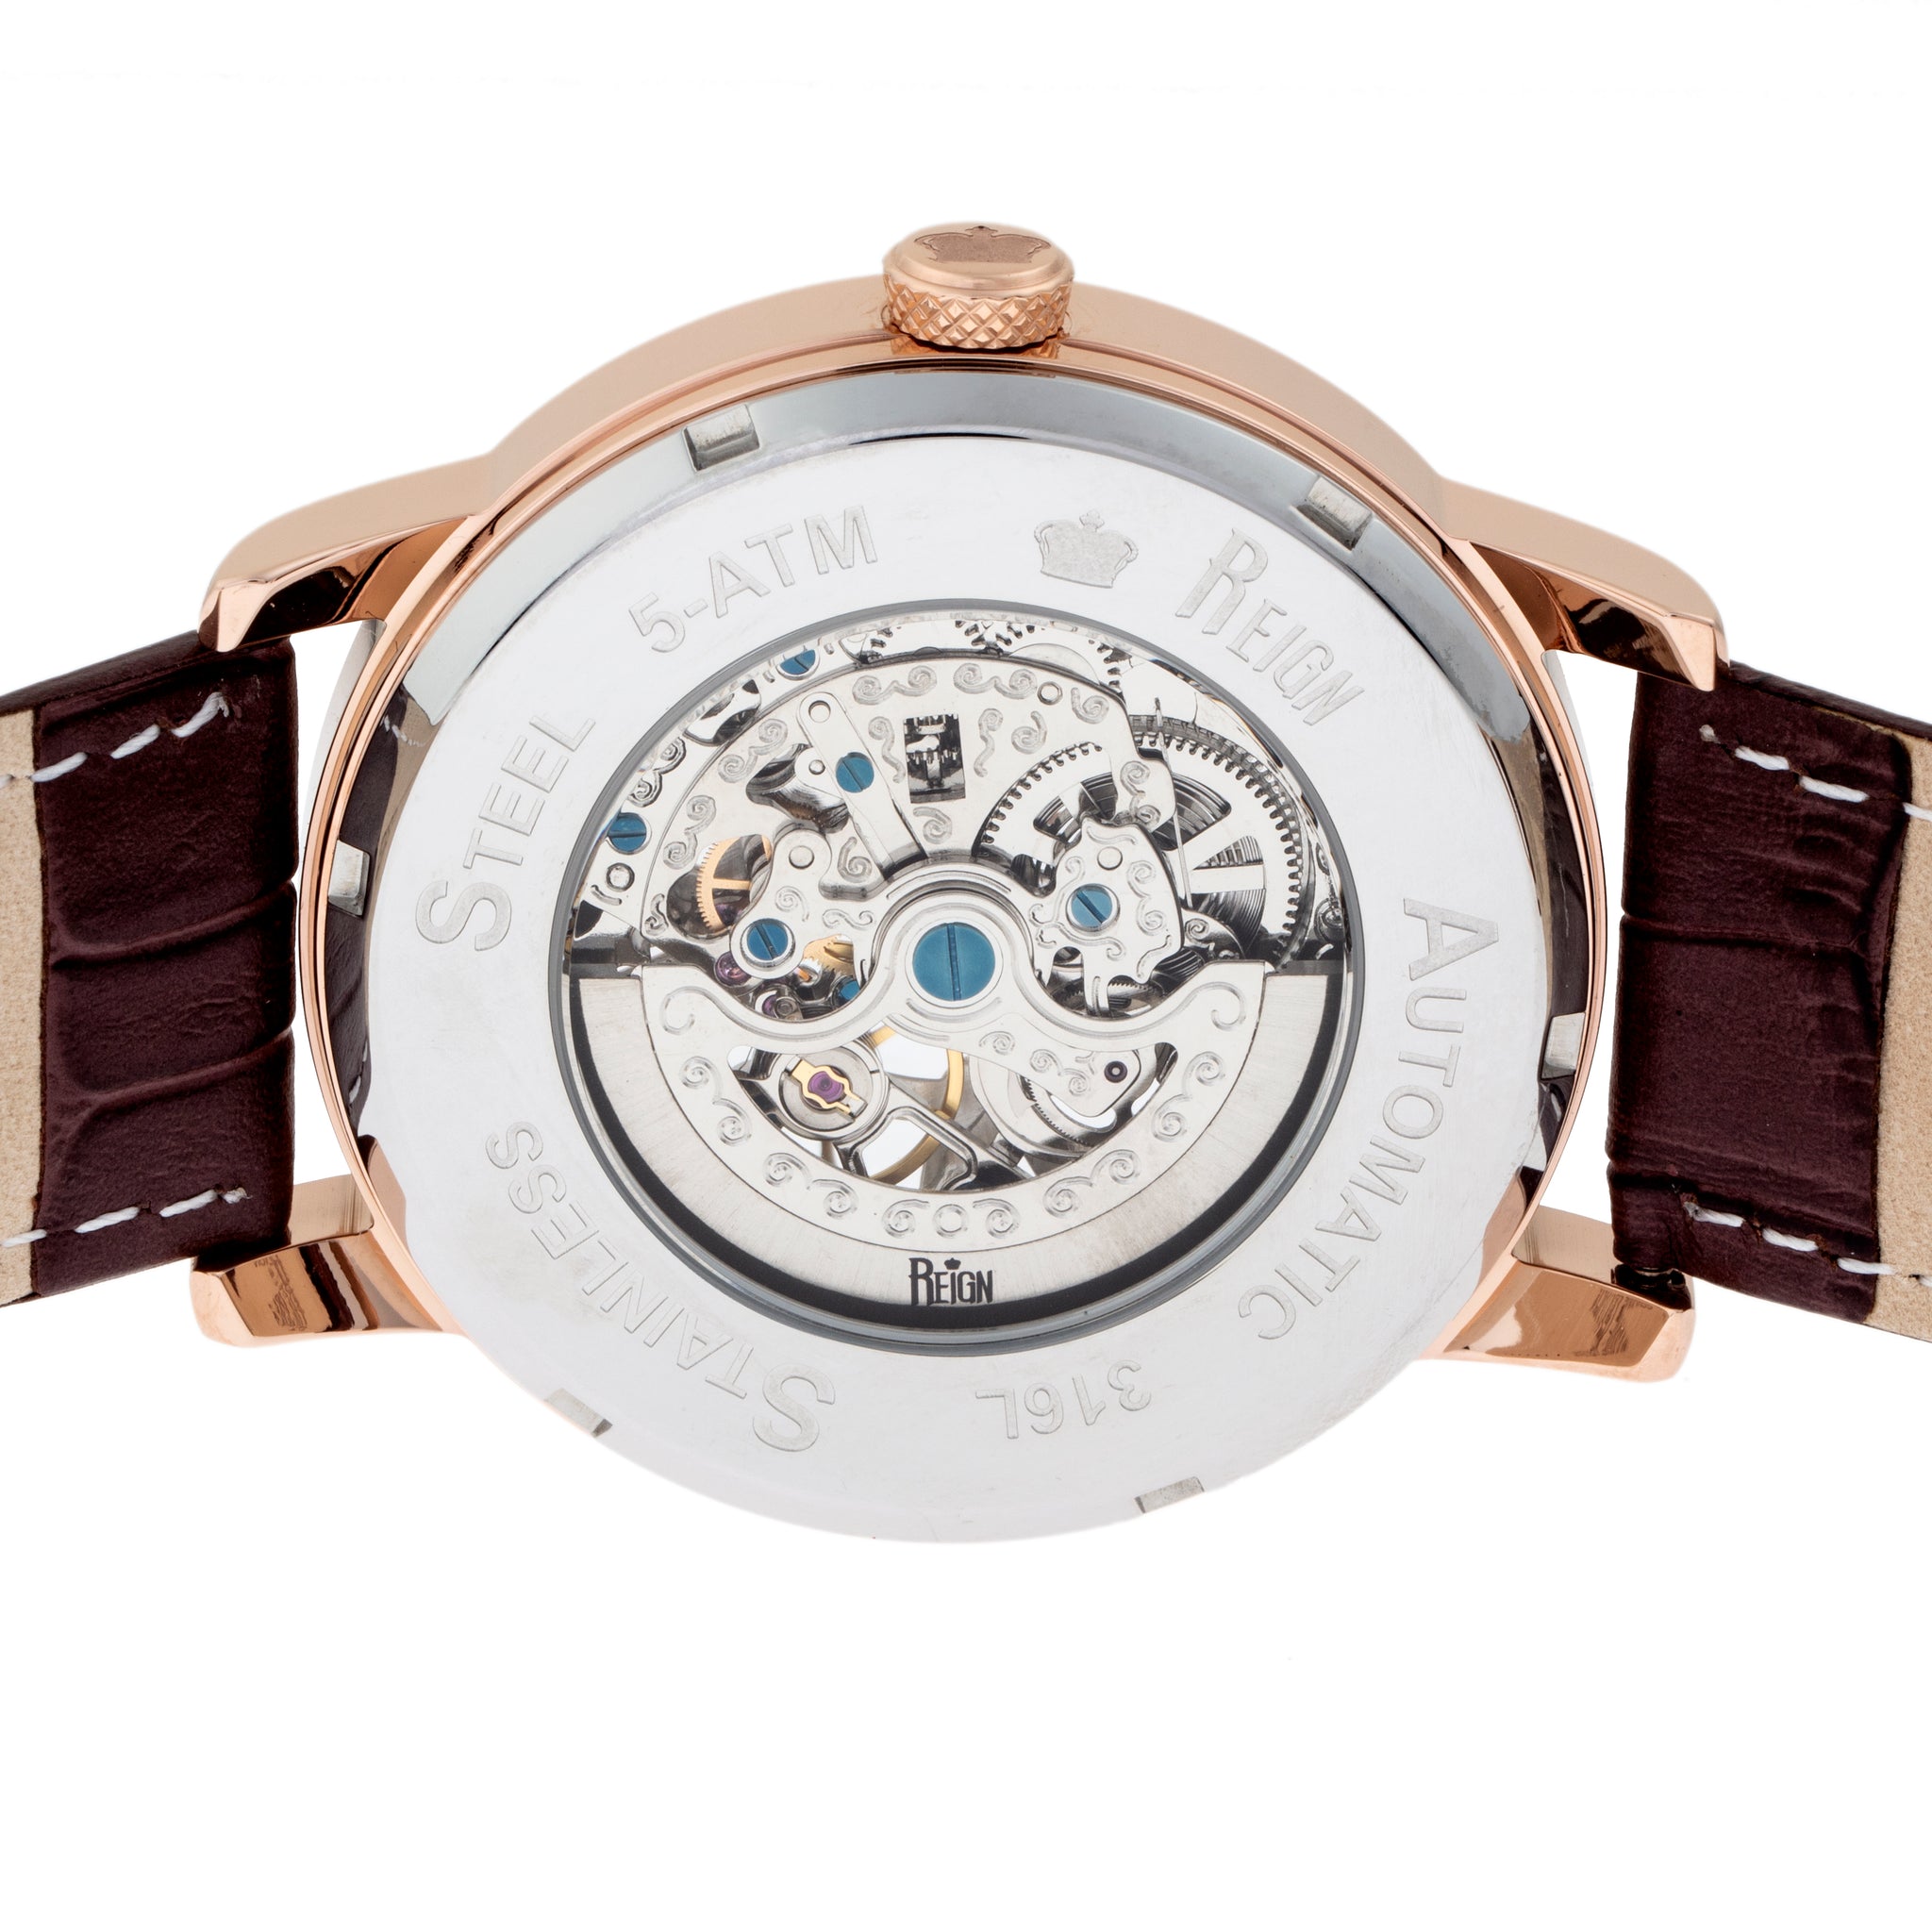 Reign Belfour Automatic Skeleton Leather-Band Watch - Rose Gold/Black - REIRN3605